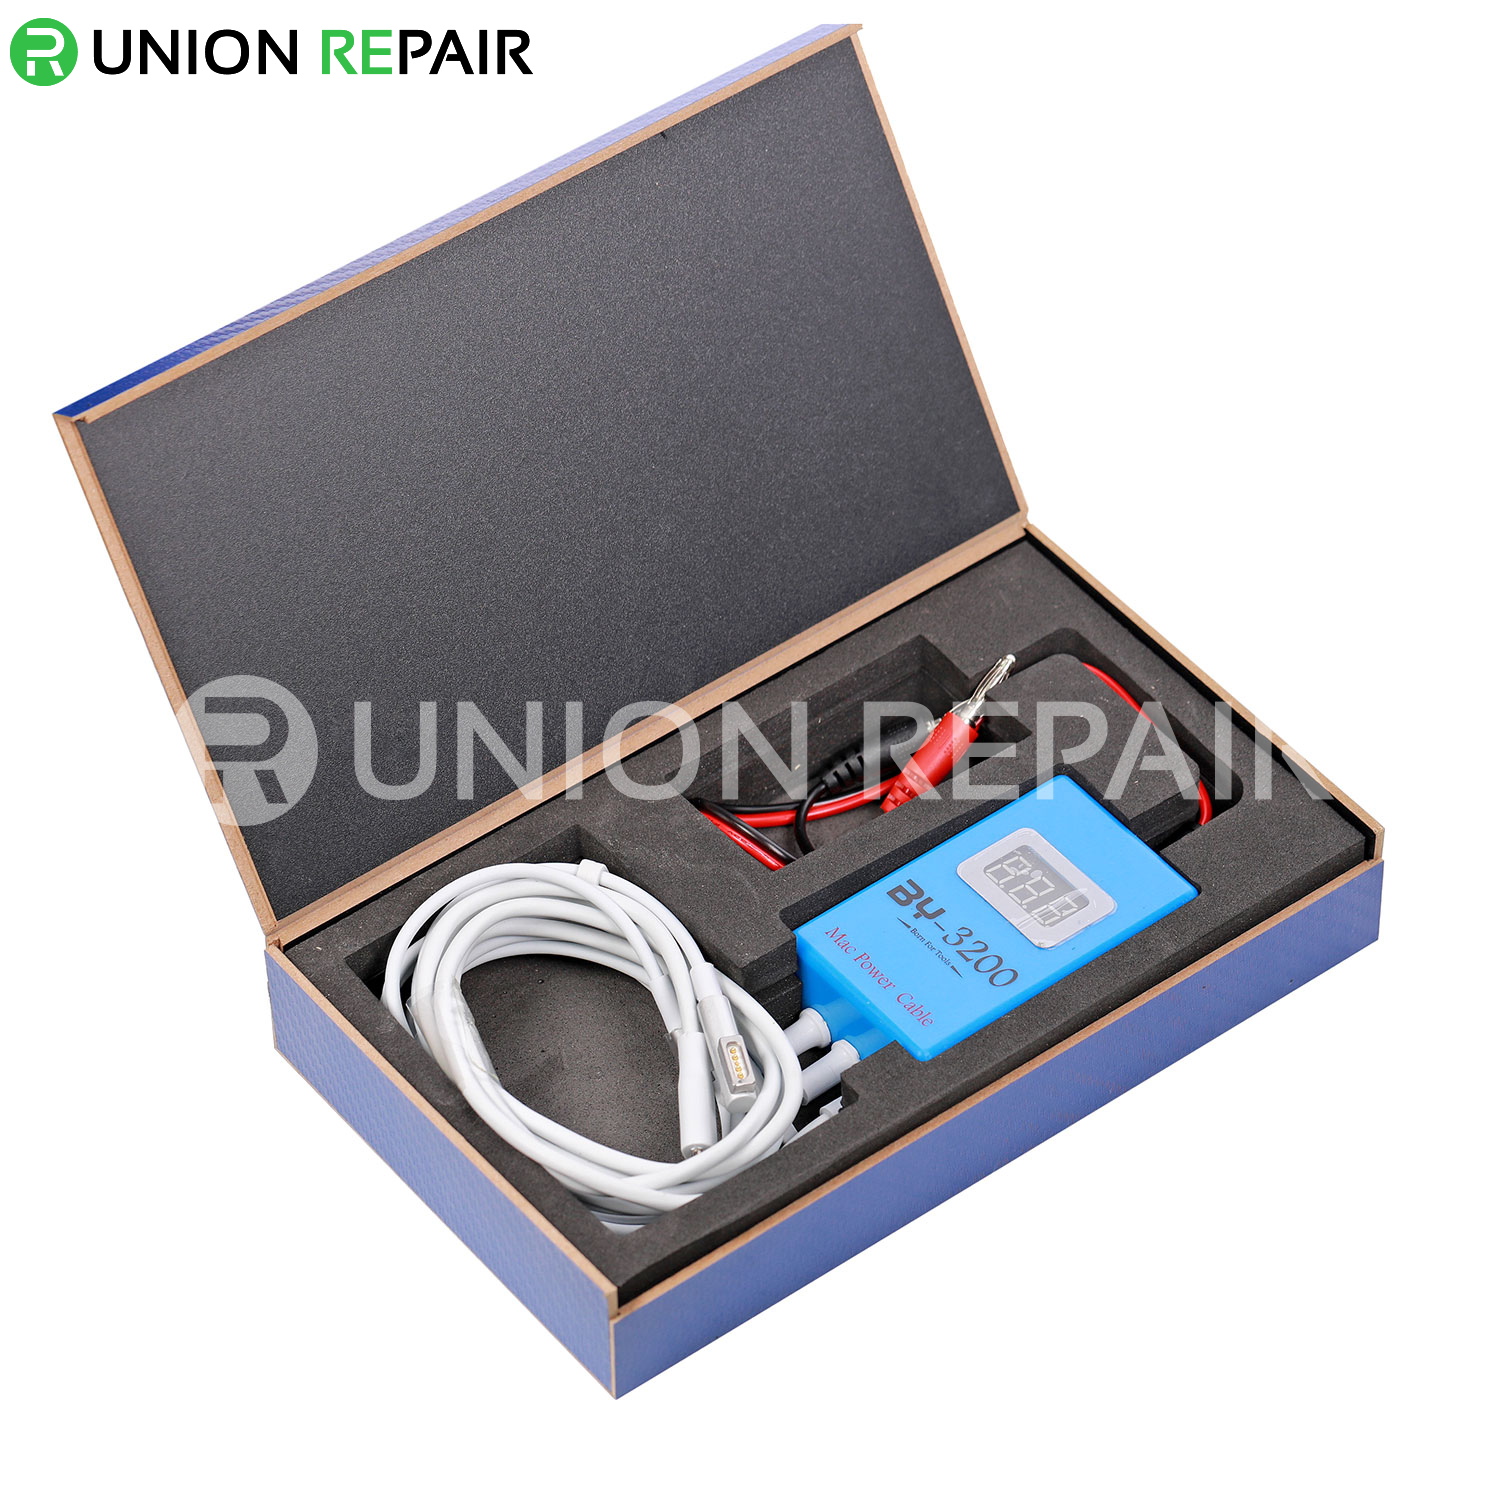 BY-3200 Boot Cable Tool Kit for Macbook Board Repair